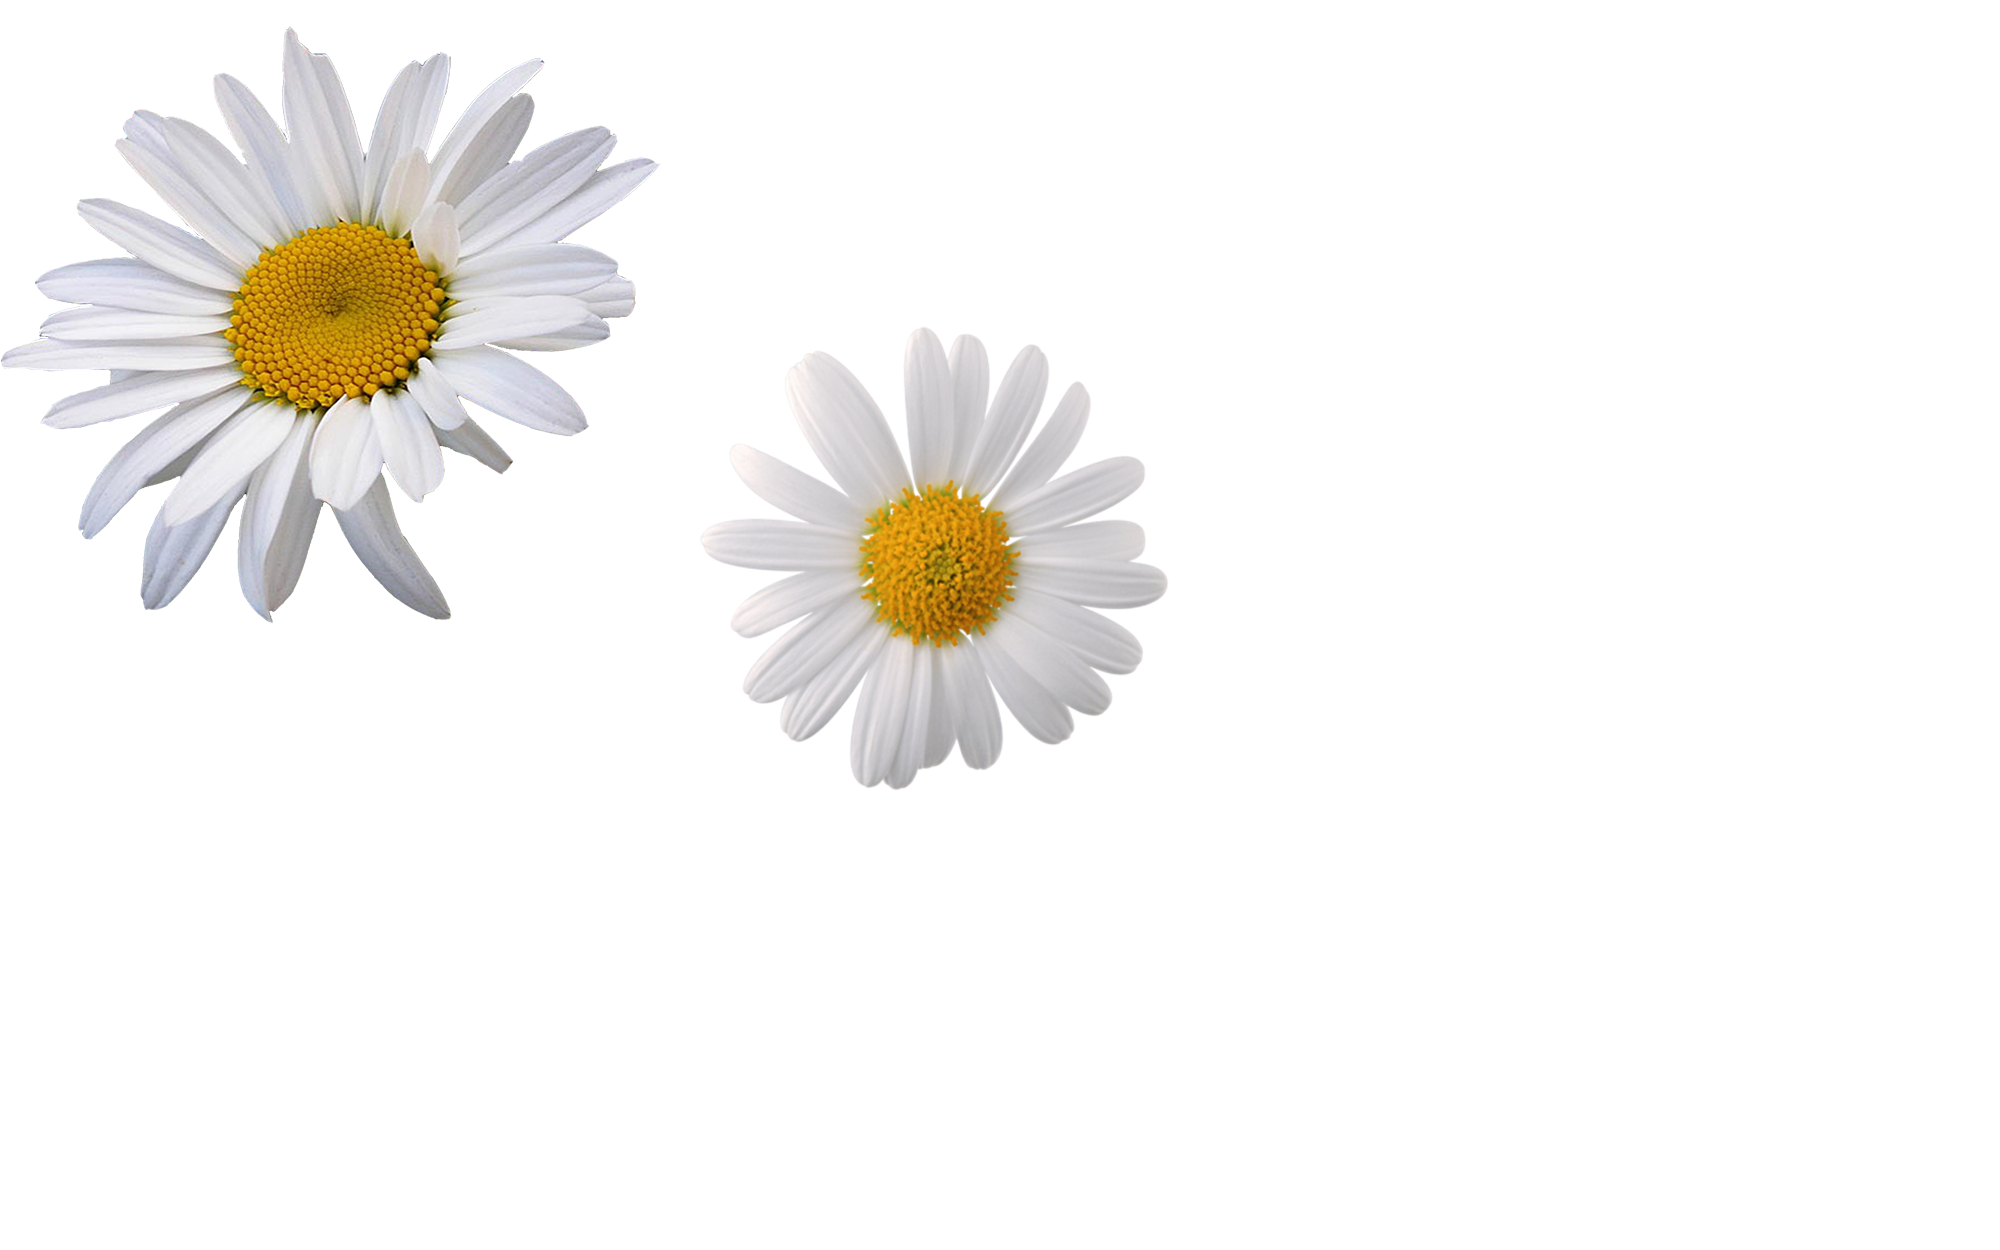 Illustration of two daisies